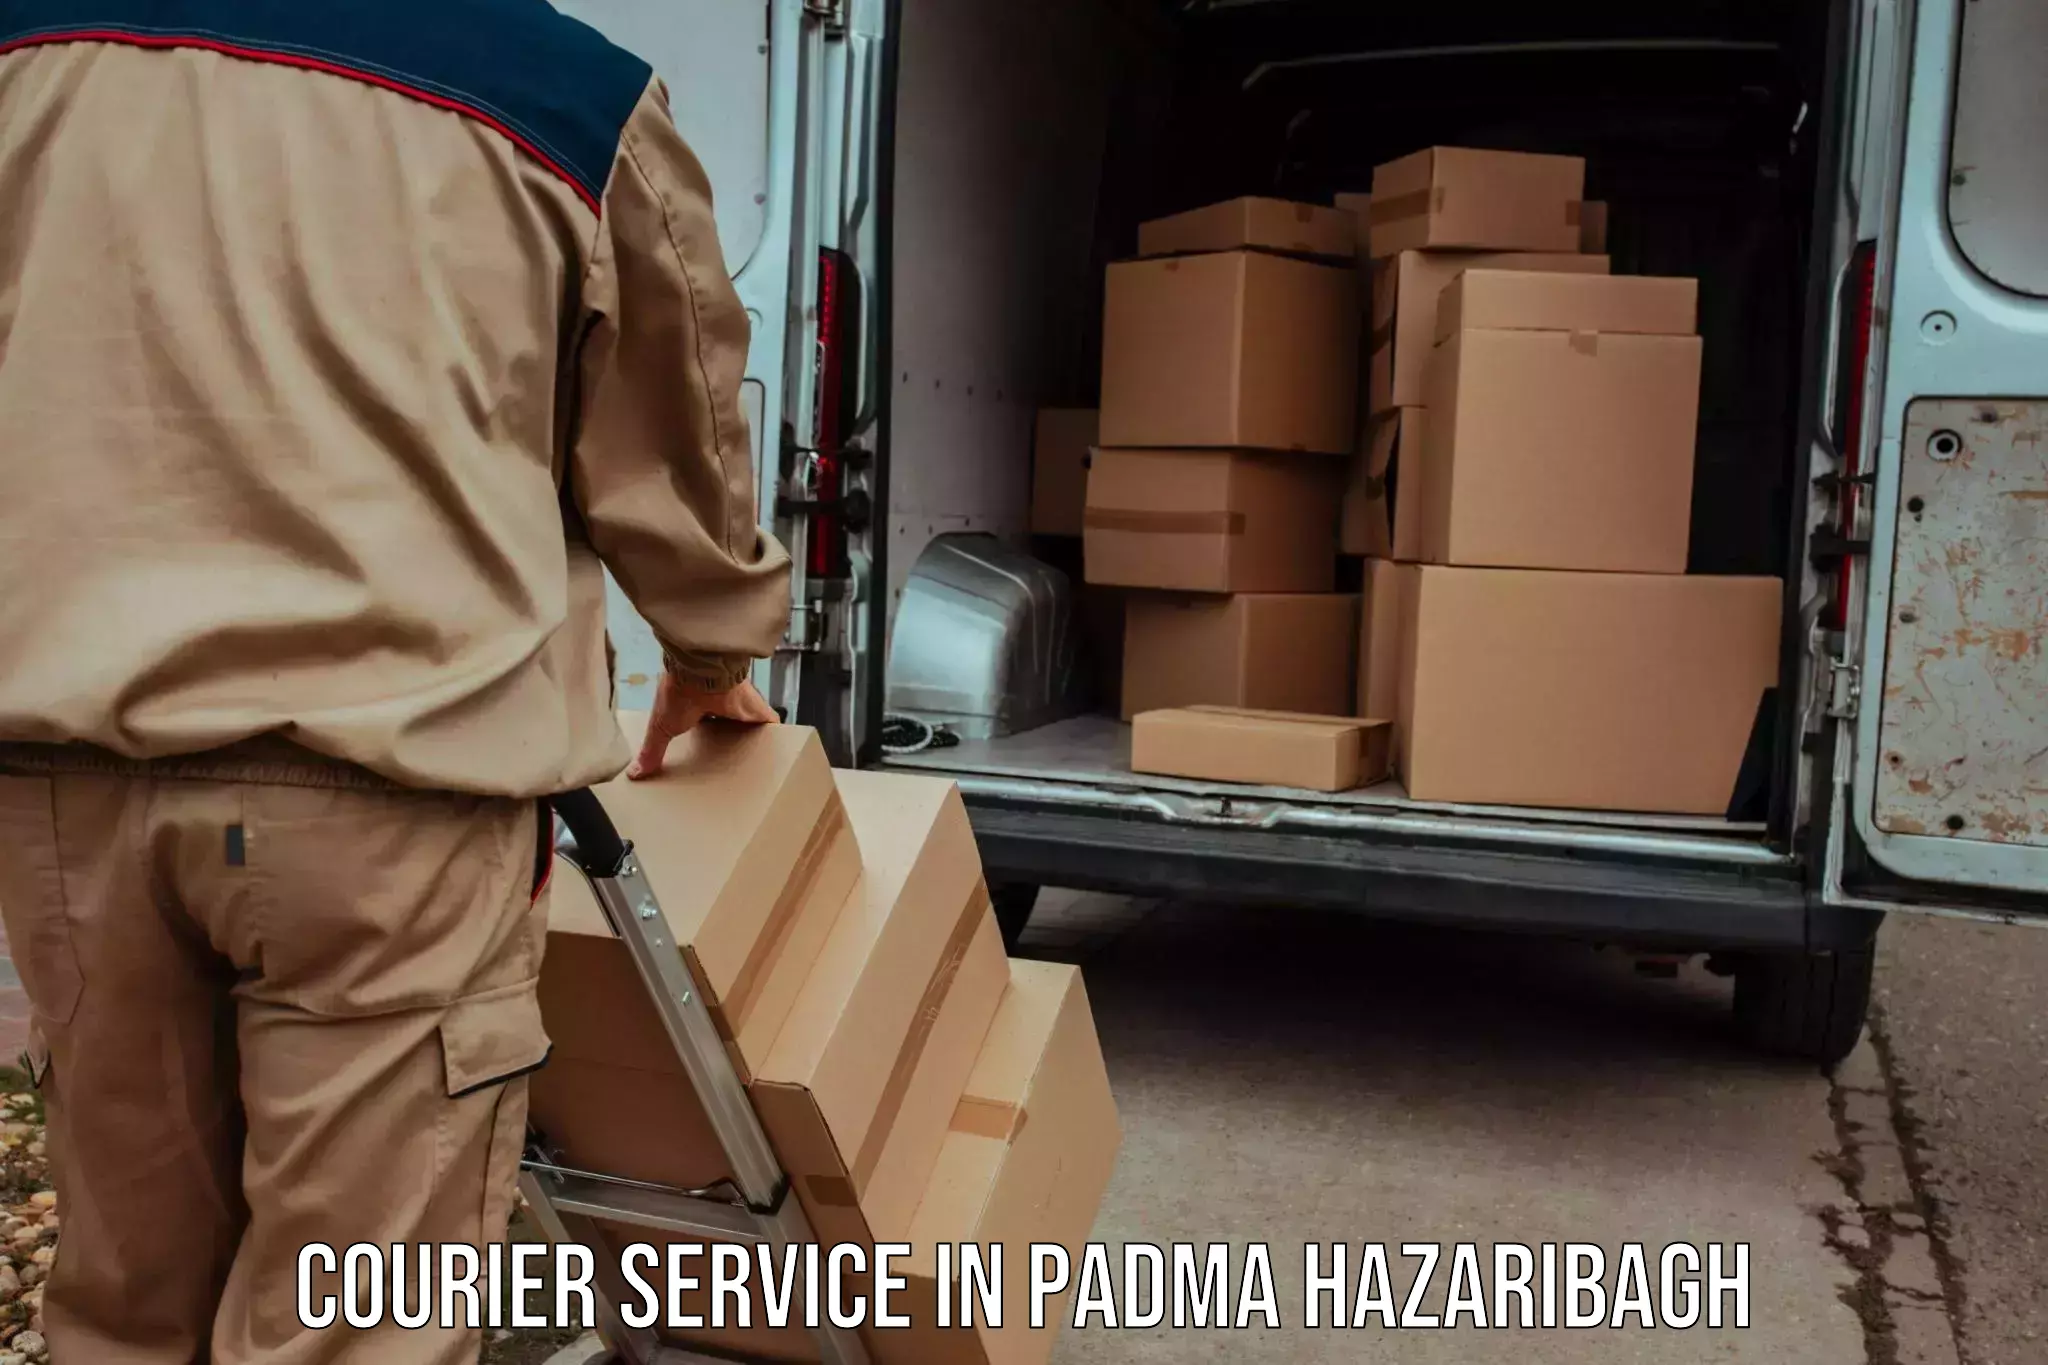 Professional parcel services in Padma Hazaribagh